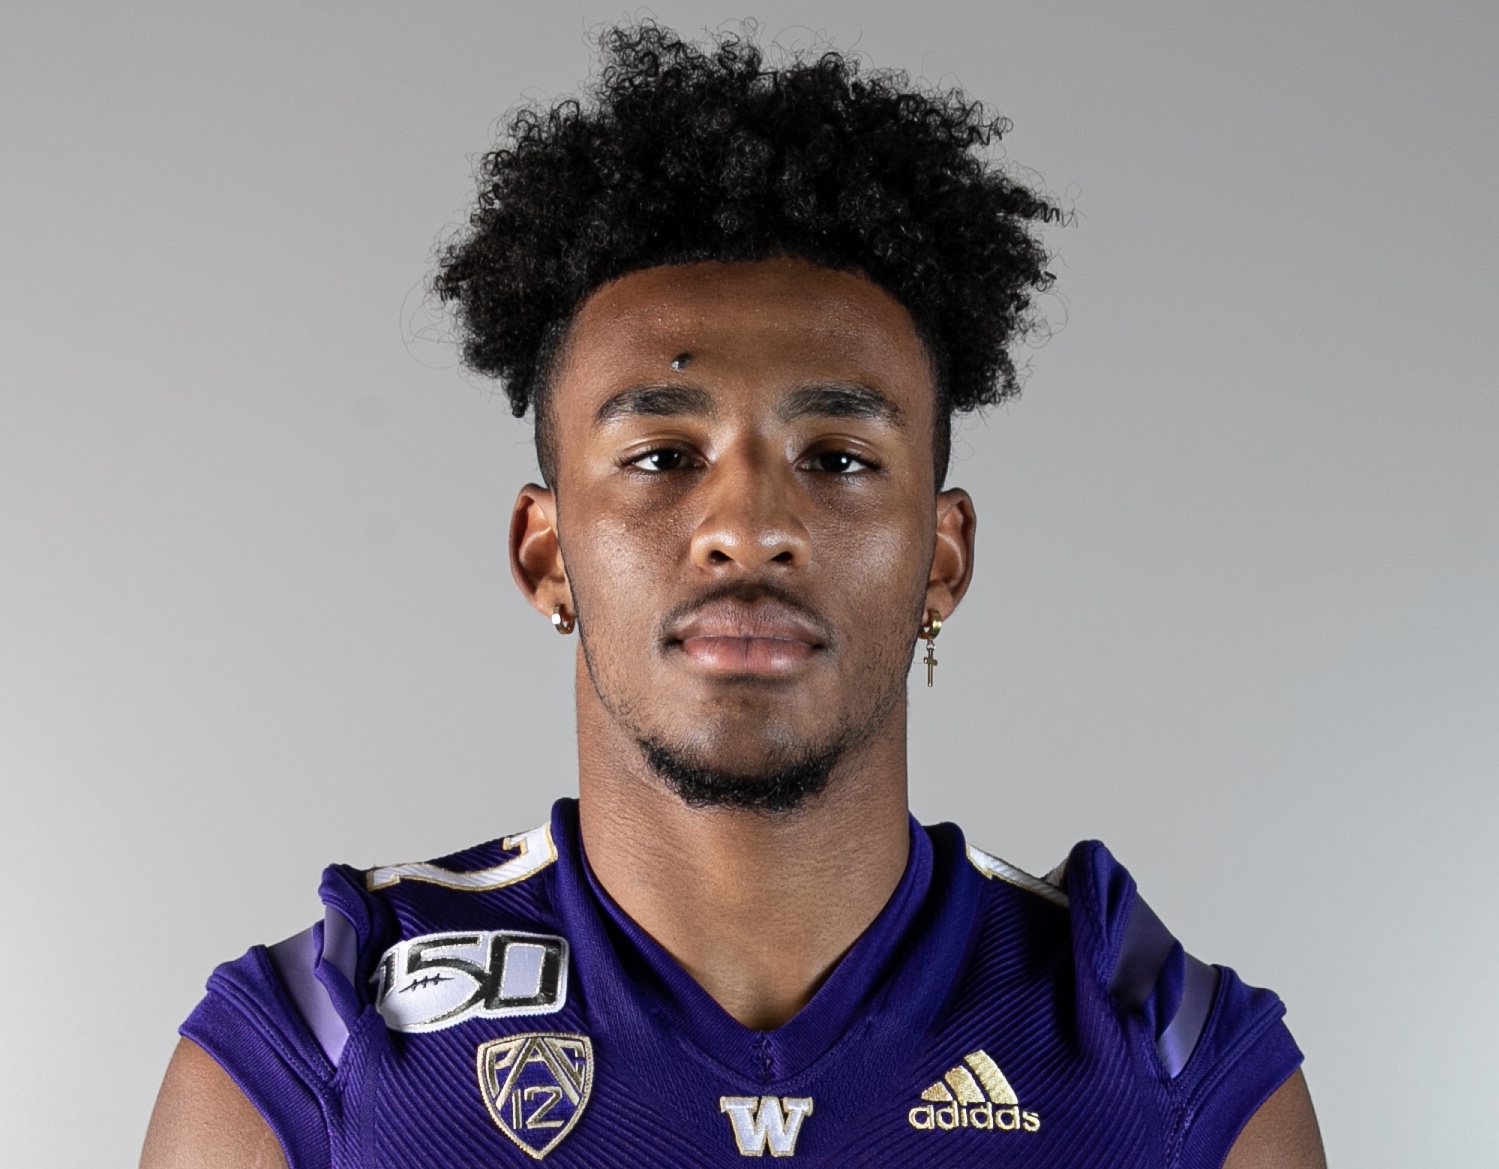 Taj Davis Opts Out, Fourth Husky to Leave for Pandemic Reasons